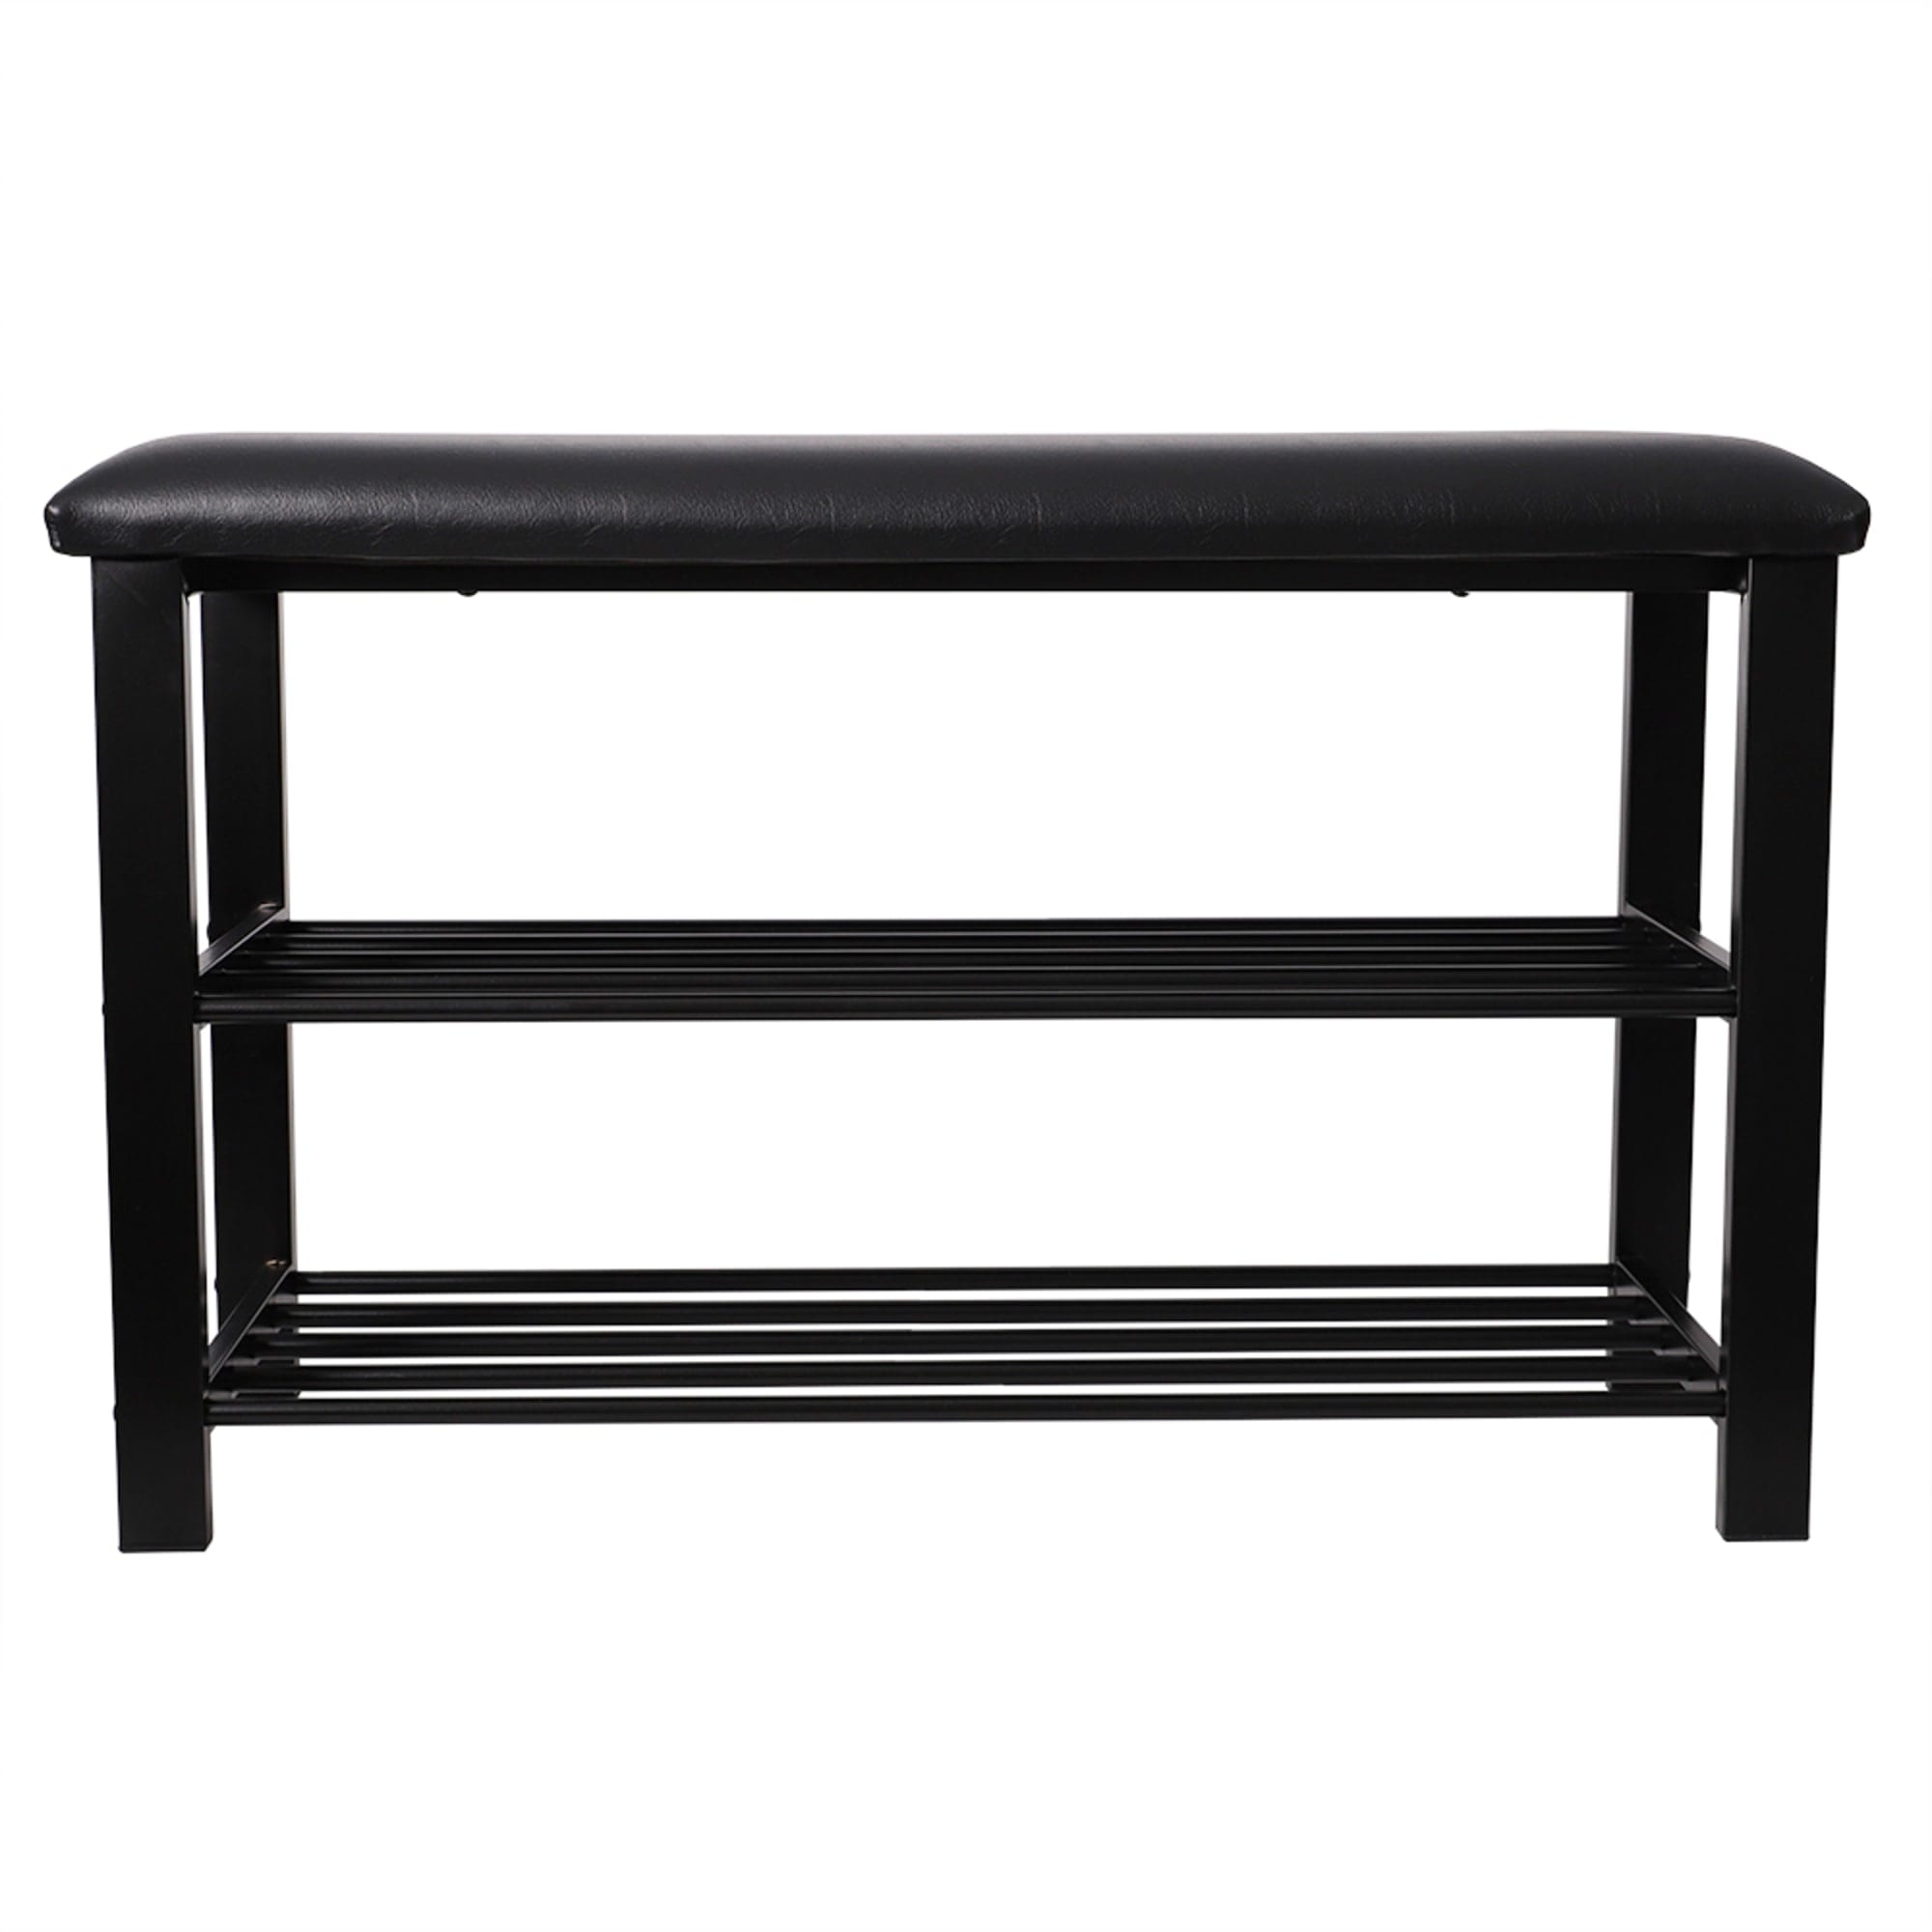 Home Basics Cushioned Storage Bench with 2 Tier Steel Shoe Rack, Black $40.00 EACH, CASE PACK OF 1